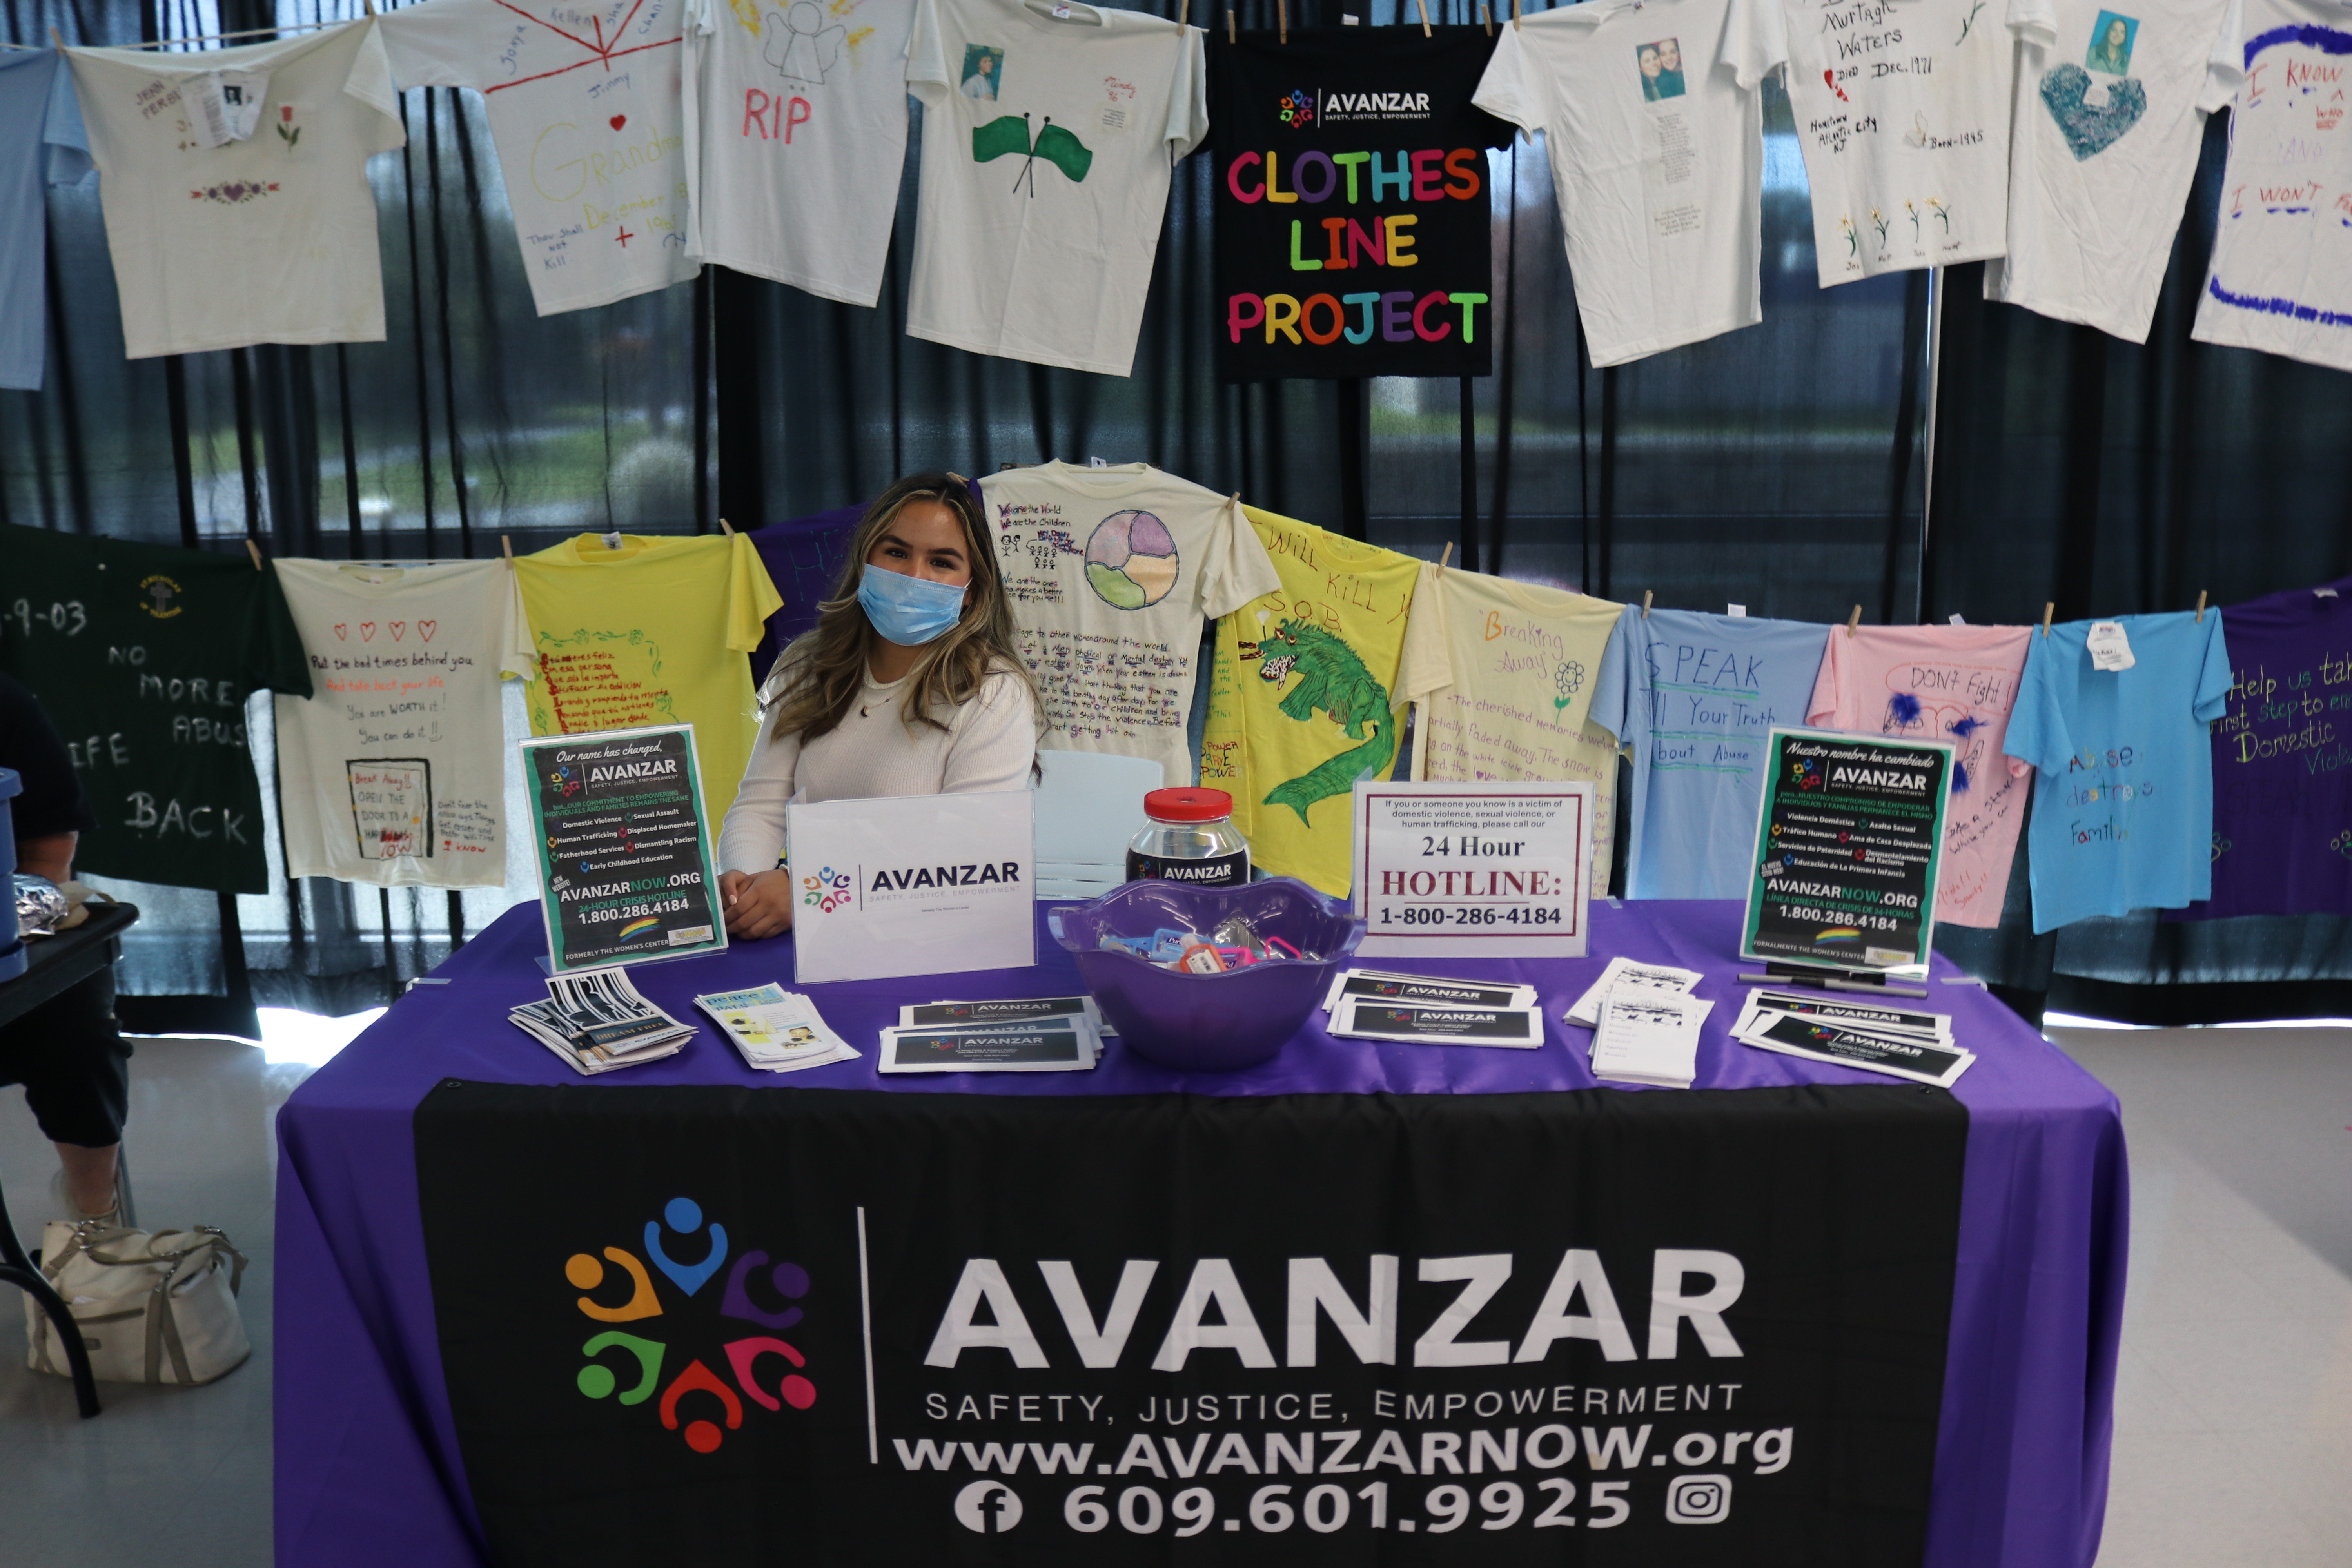 Avanzar table in the student center with The Clothesline Project